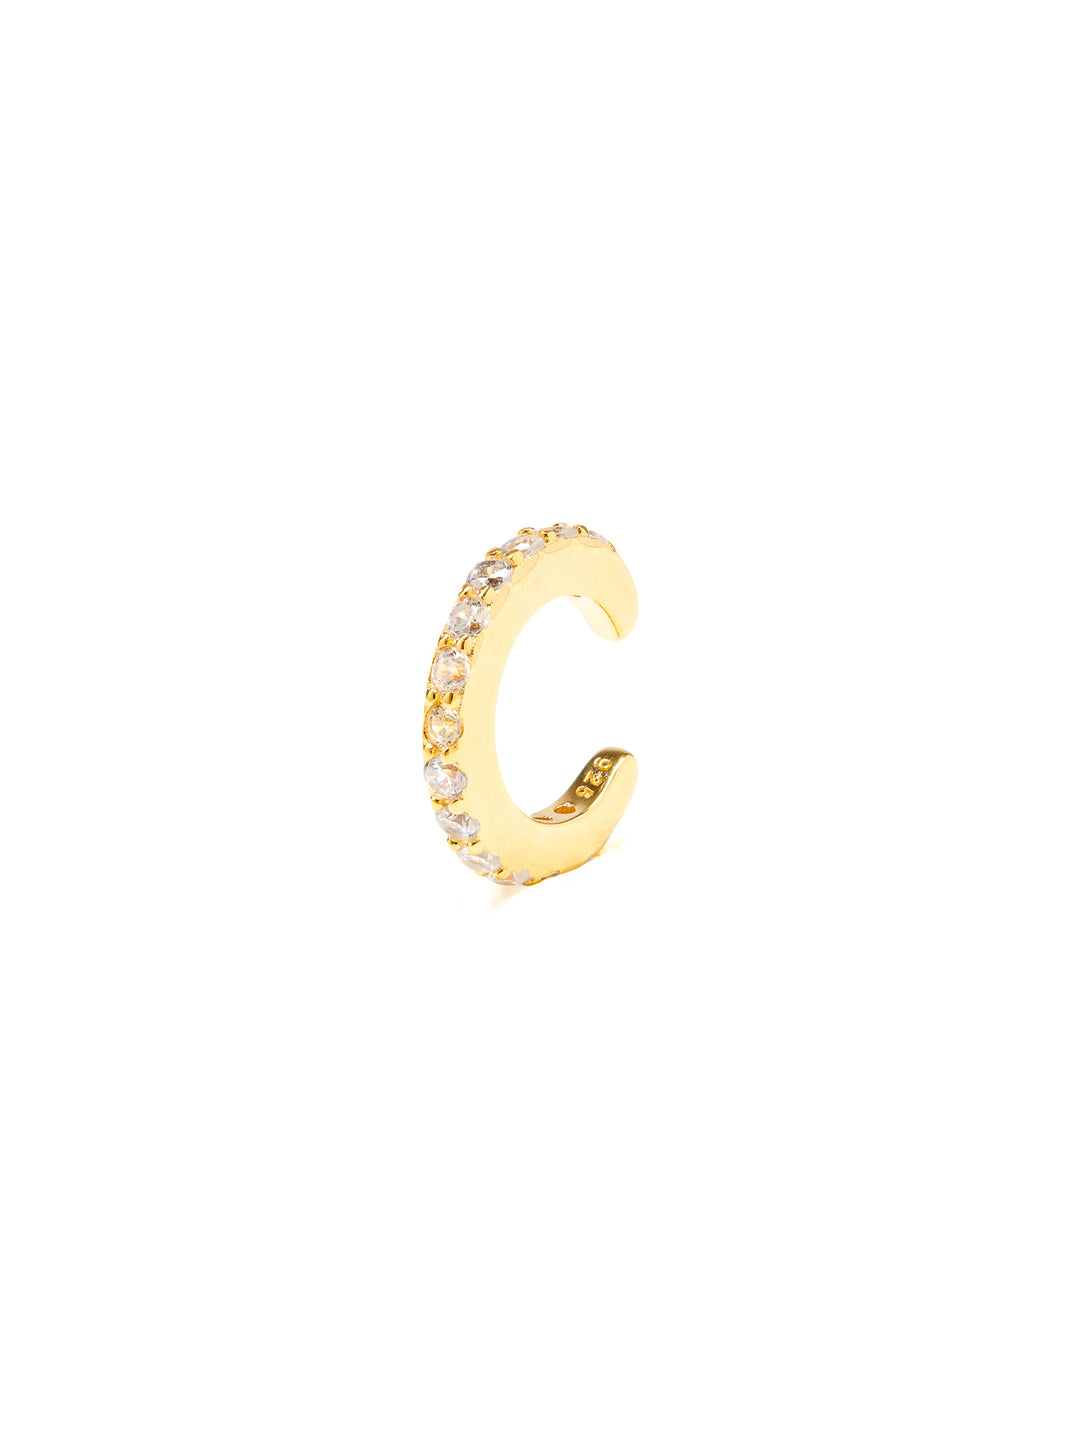 SET - Two ICONIC Ear Cuffs • Color: White Gold and 18K Yellow Gold